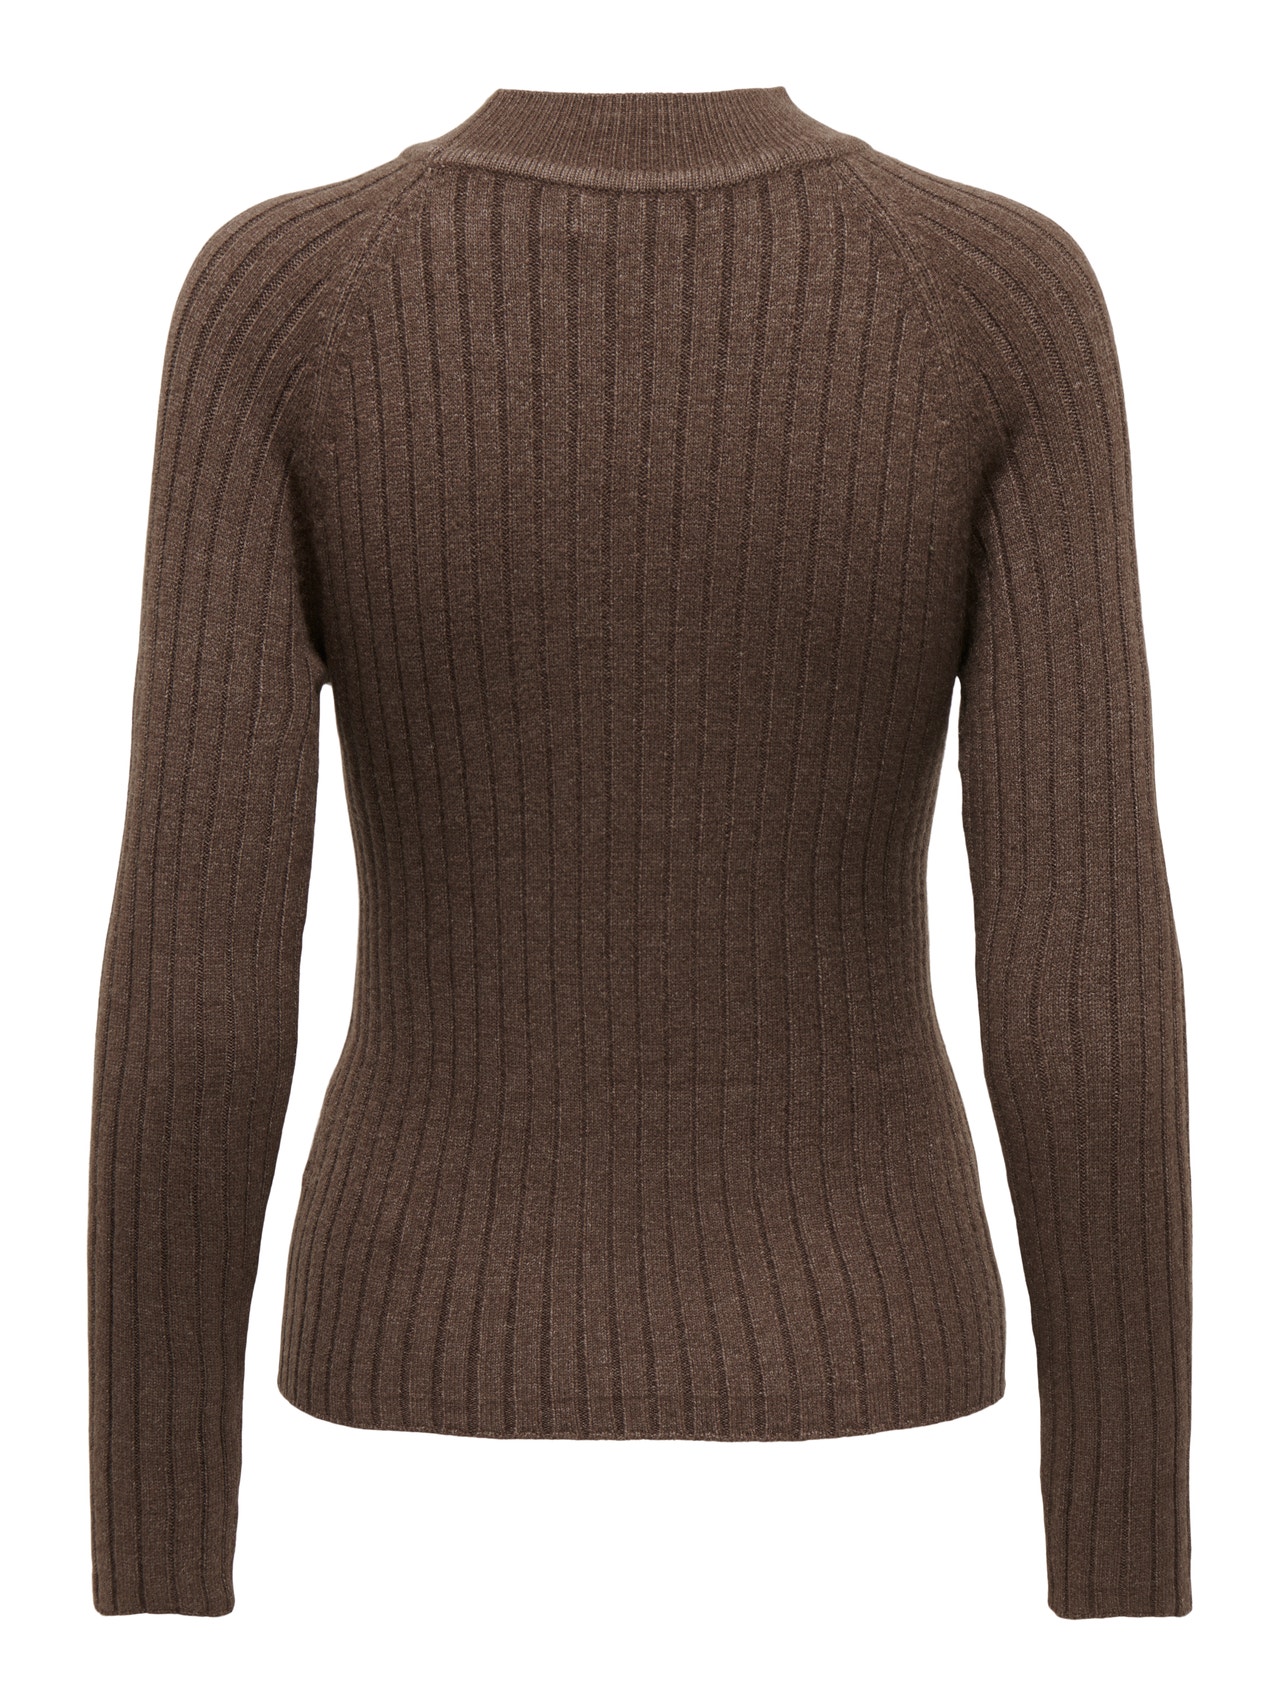 ONLY High neck Pullover -Chocolate Brown - 15238267